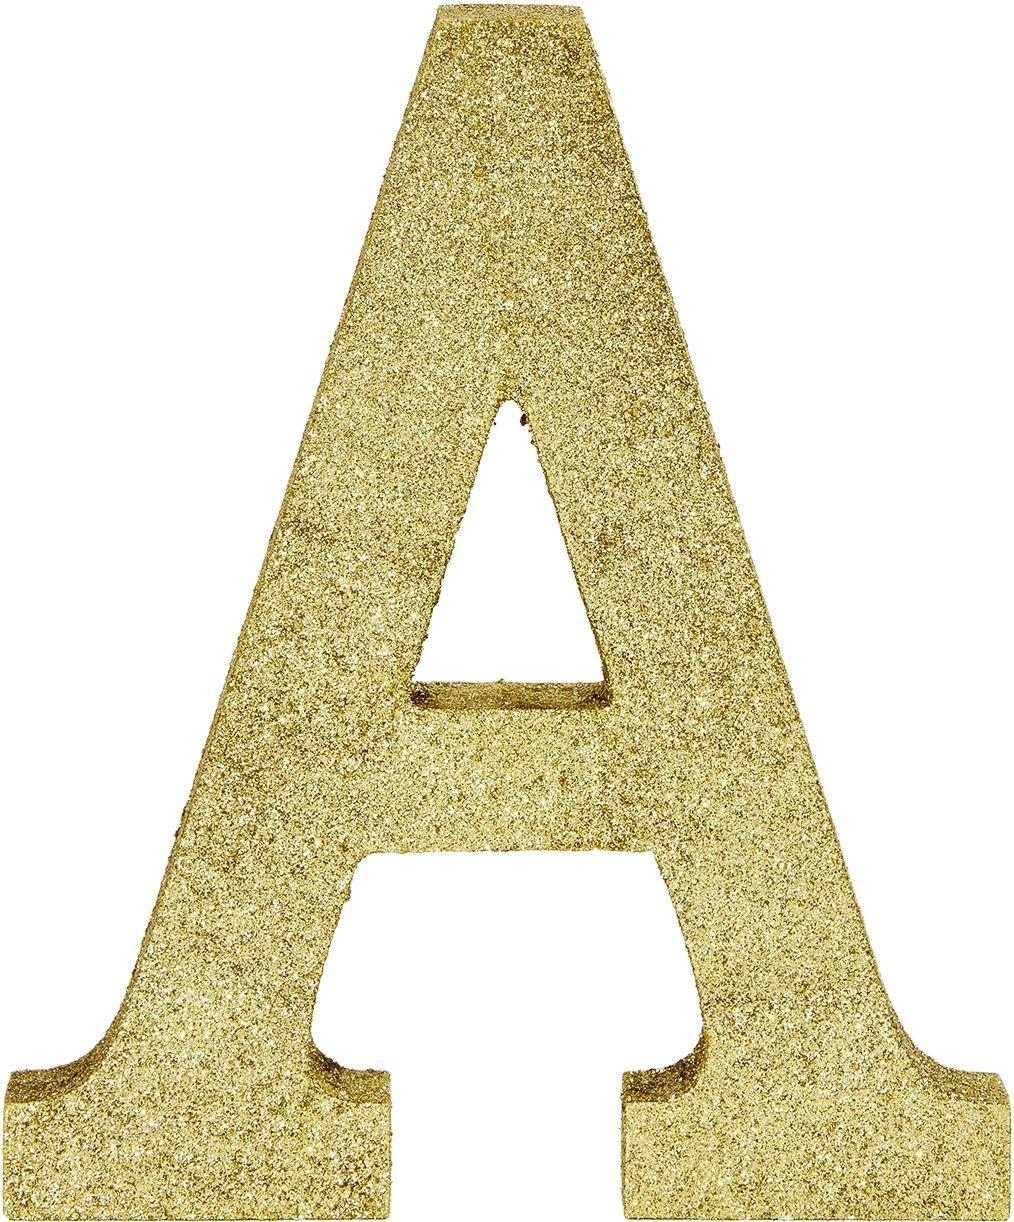 Styrofoam Letters 3D 20,foam Gold Numbers 20 Inches,large Free Standing  Letters,baby Shower Decor,foam Sign, Styrofoam Gold Logo, Signboard 